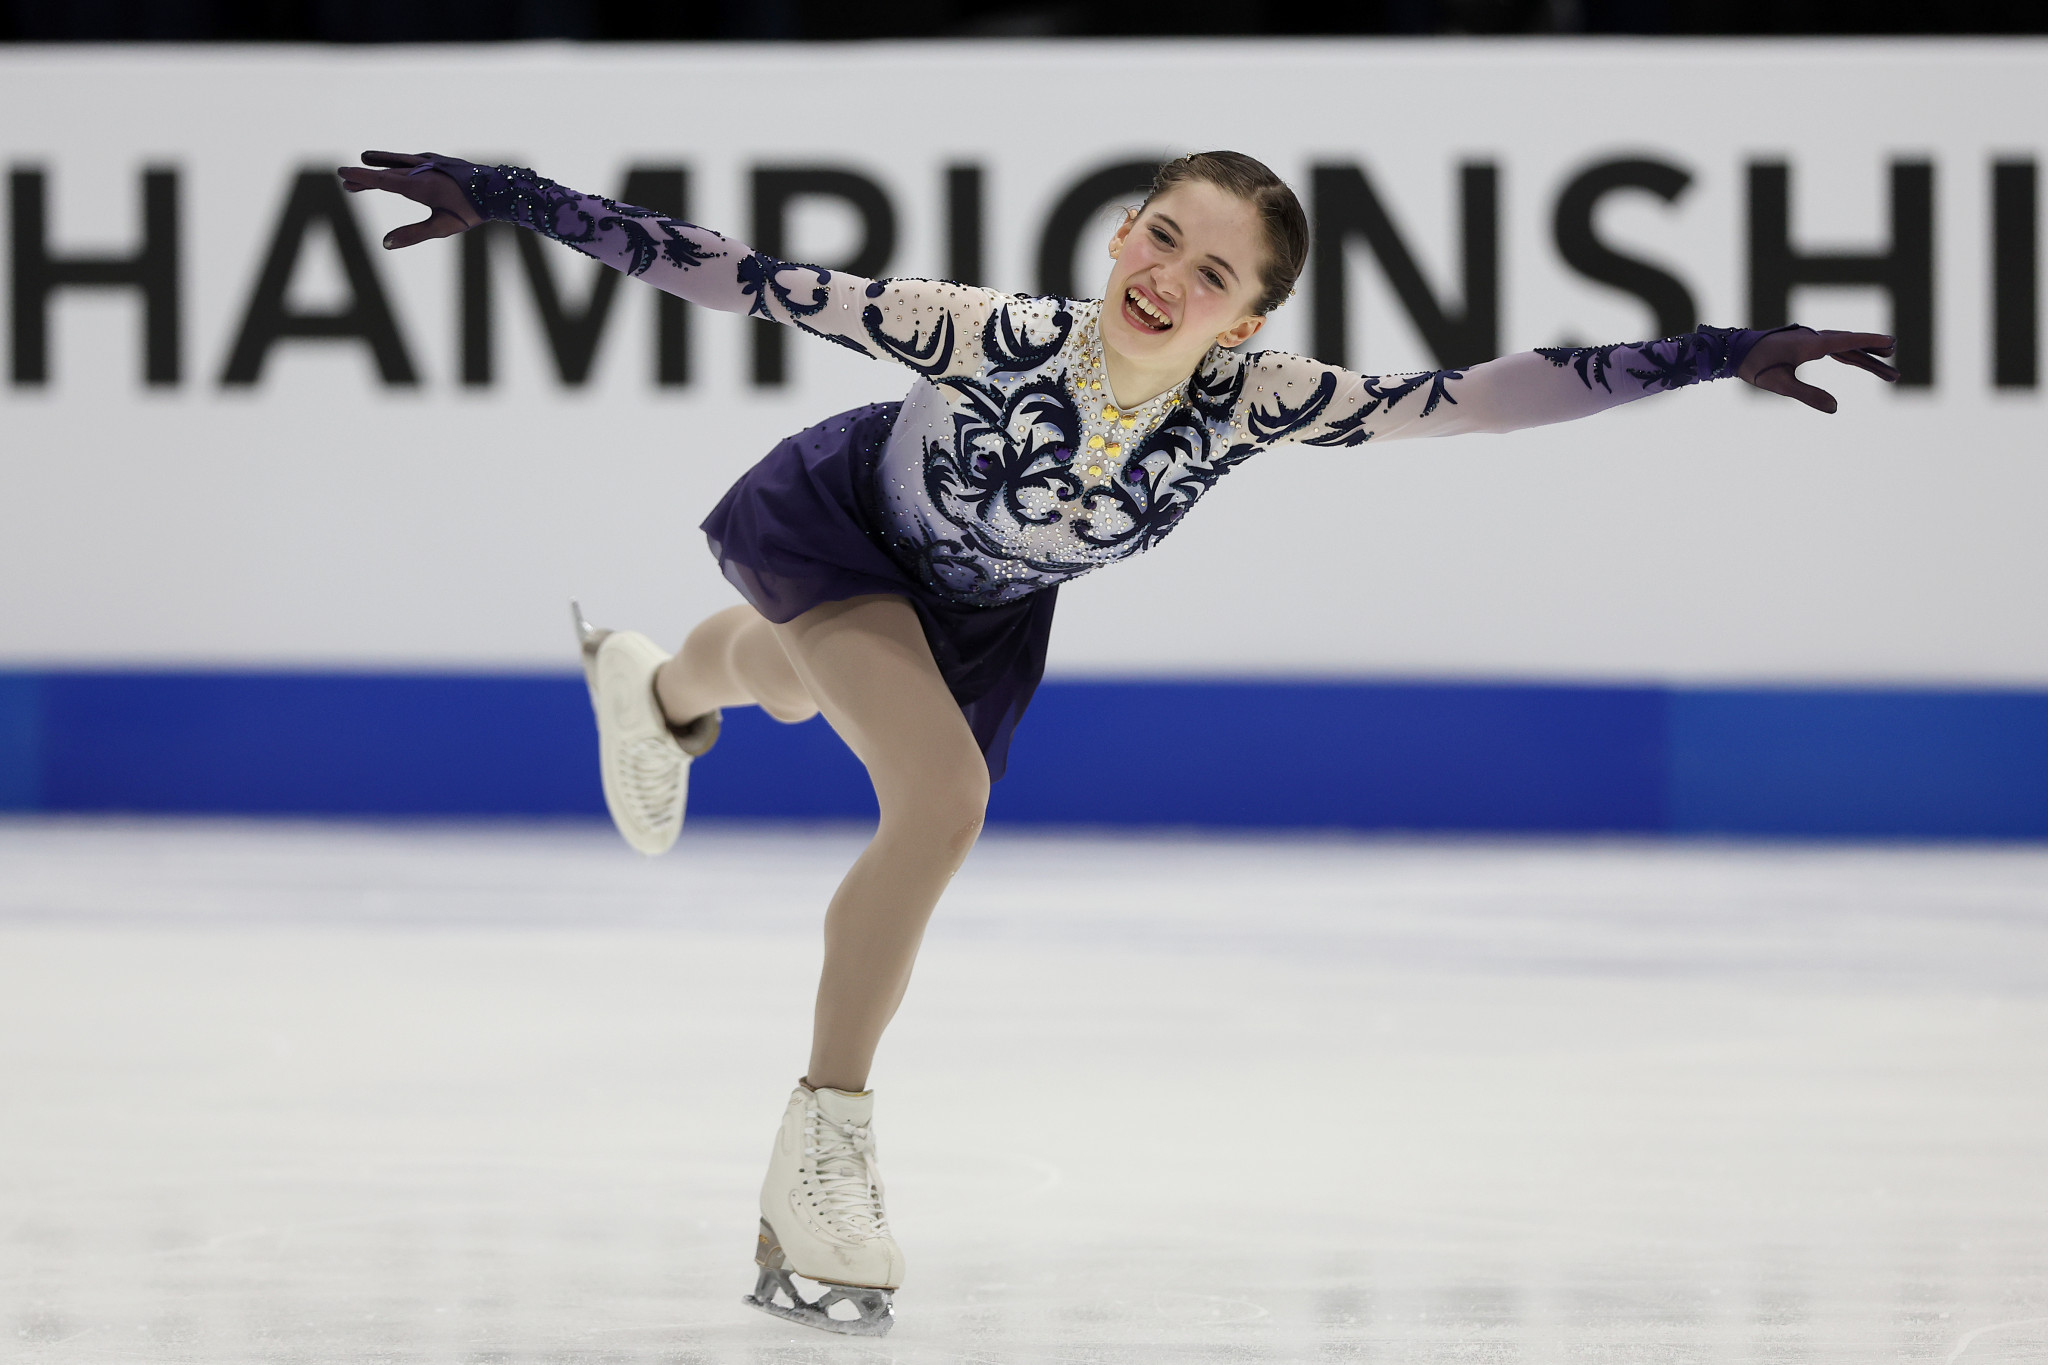 Isabeau Levito won the women's singles on the final day of the World Junior Figure Skating Championships ©Getty Images